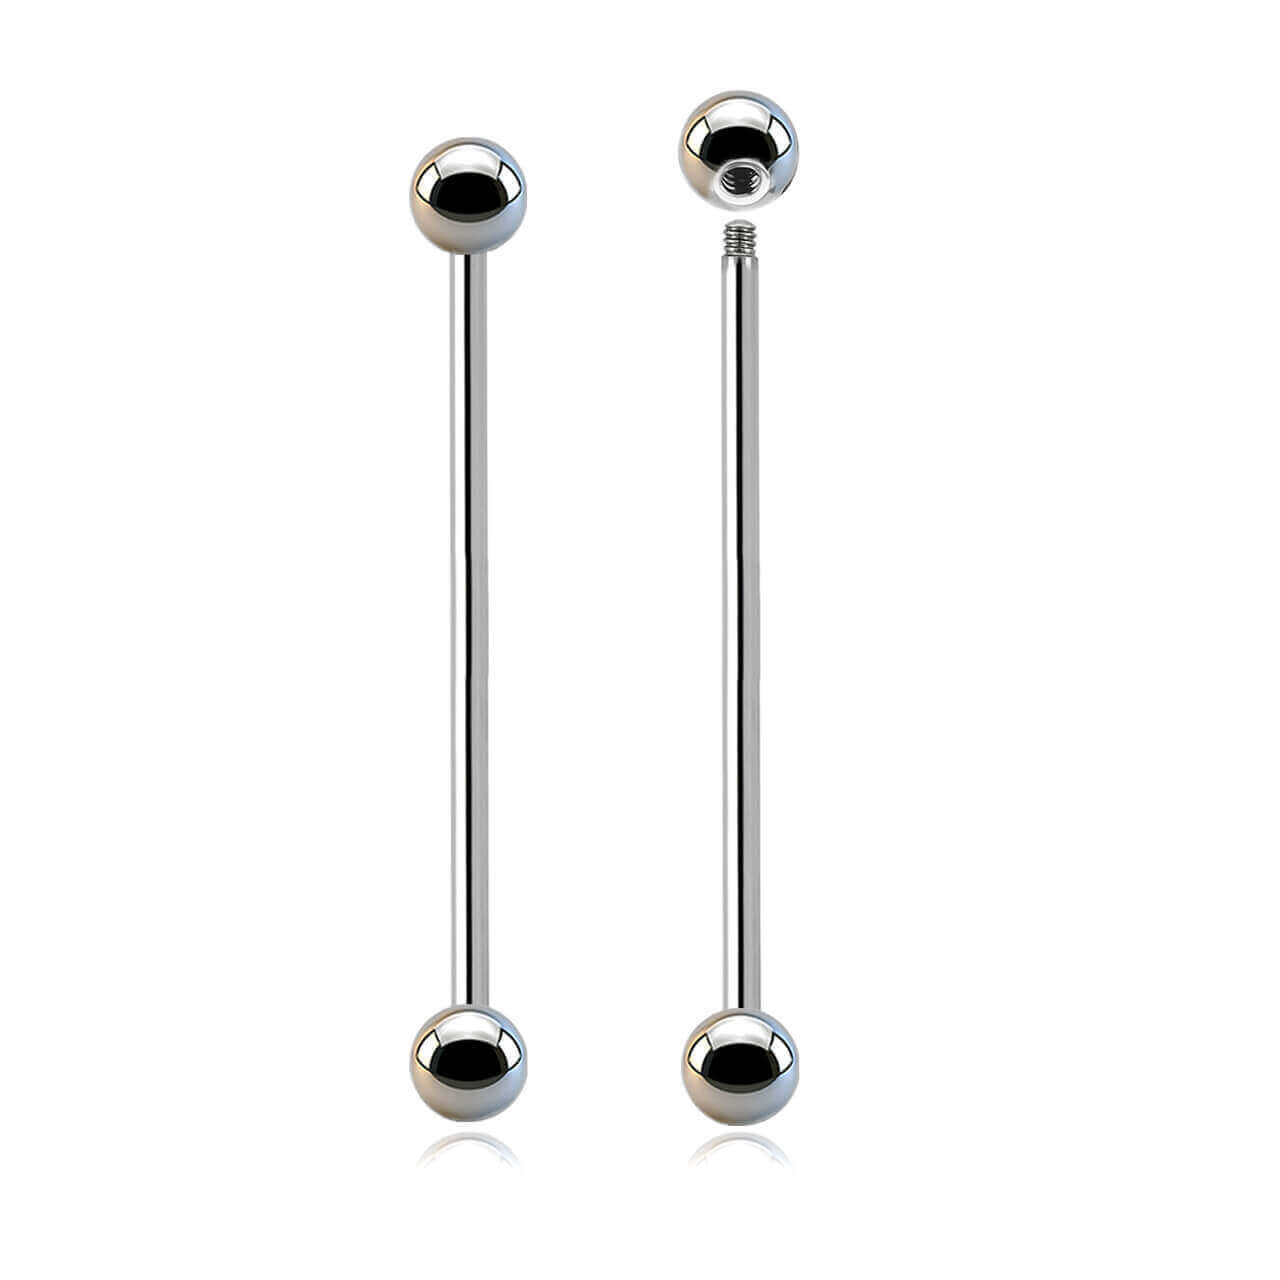 SBA12B5I Wholesale Body Jewelry pack of 25 surgical steel industrial barbells, Thickness 1.2mm, Ball size 5mm